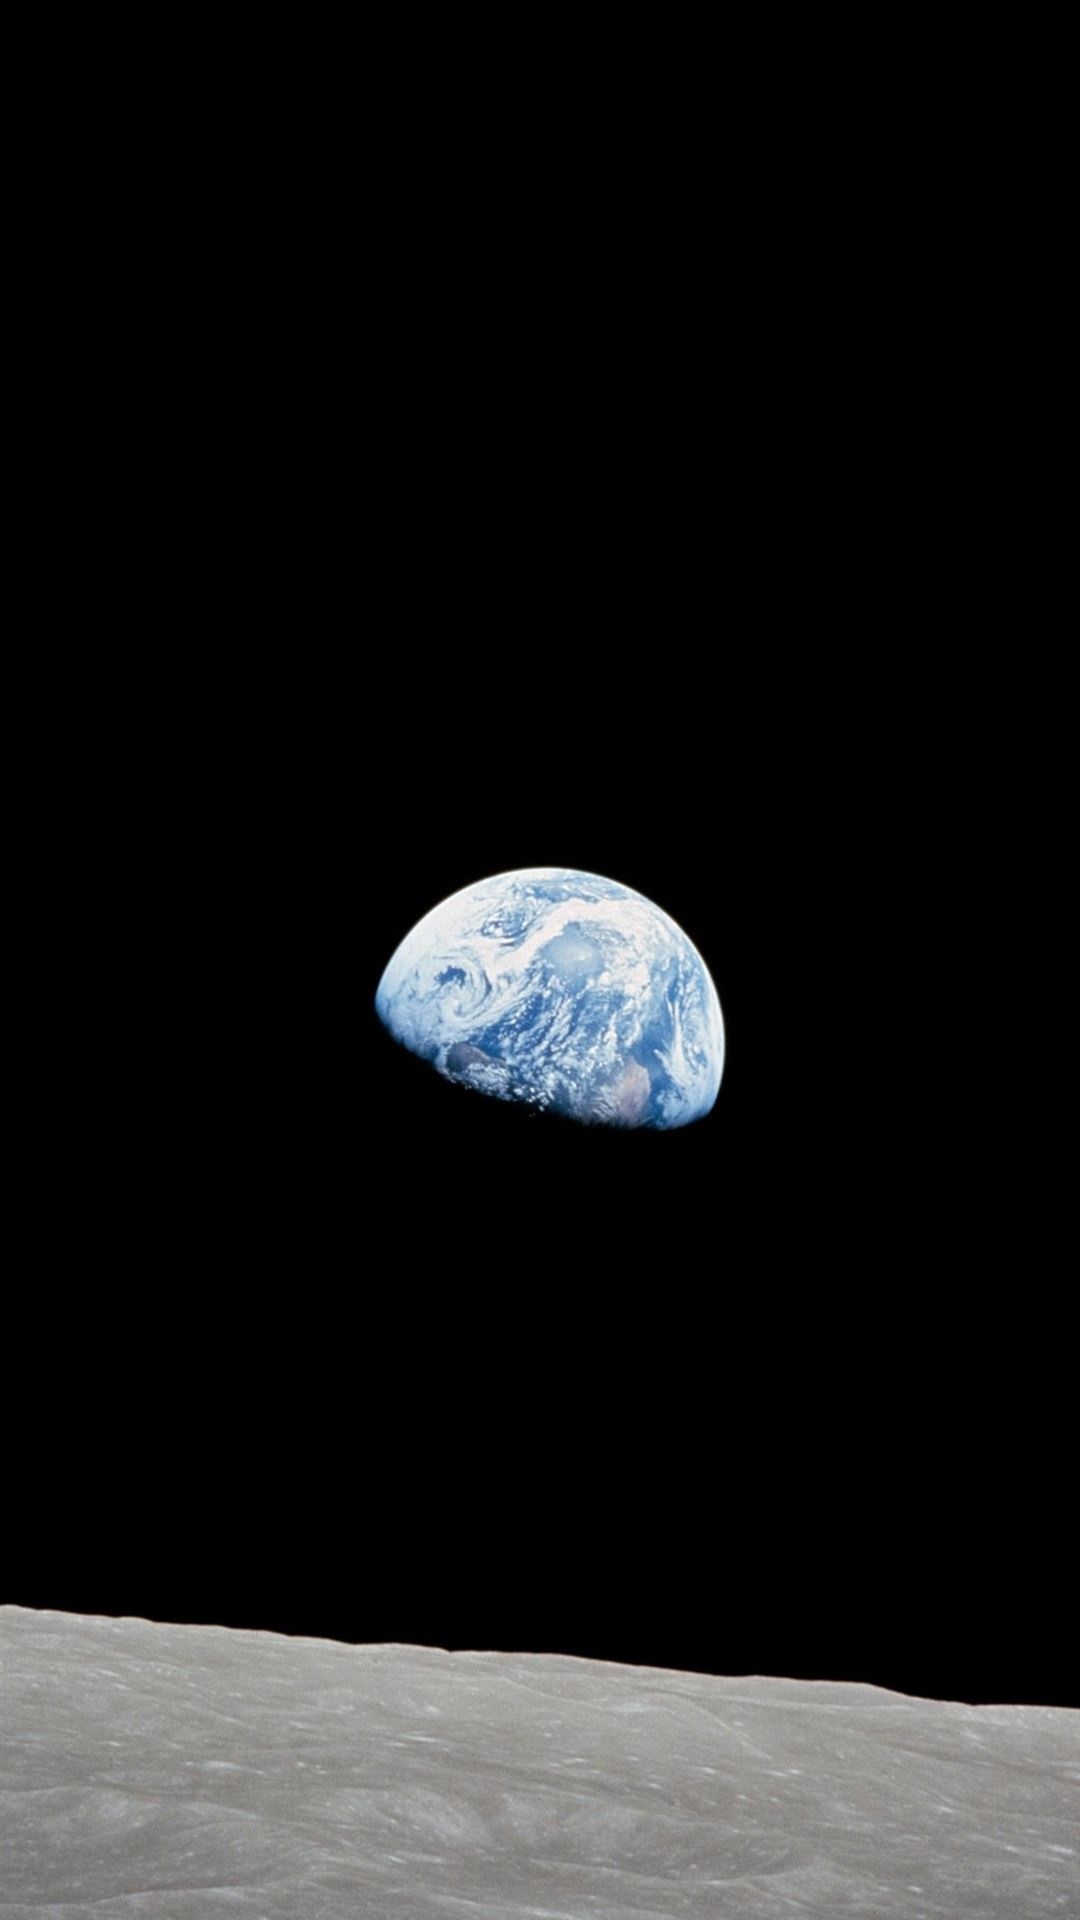 Apollo 13, Intriguing iPhone wallpapers, Astronauts' journey, Lunar mission, 1080x1920 Full HD Phone